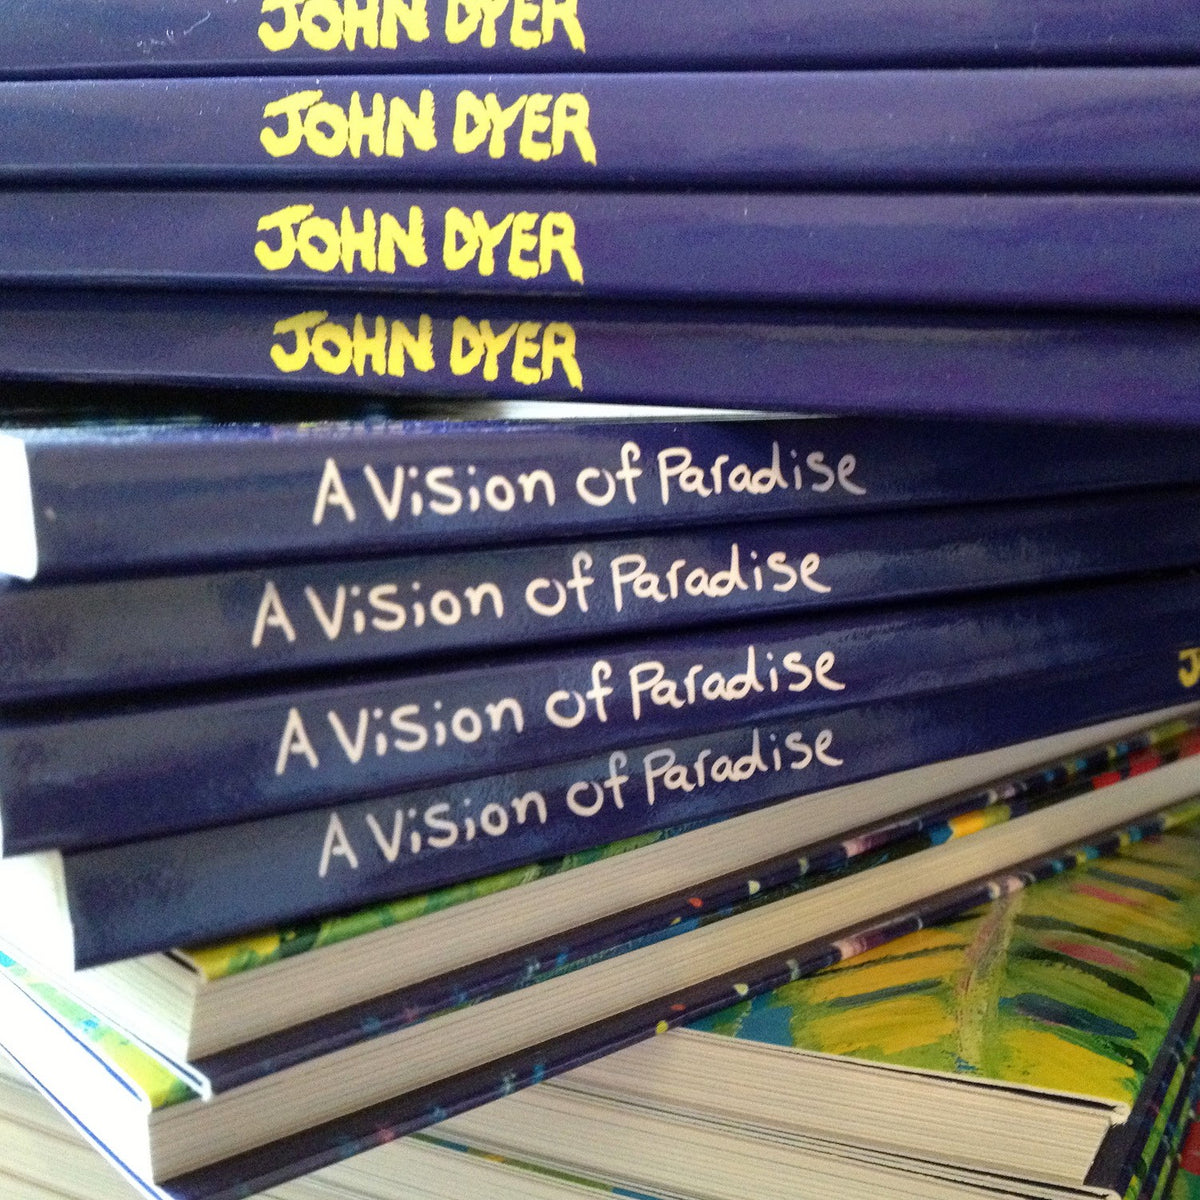 John Dyer, A Vision of Paradise Book